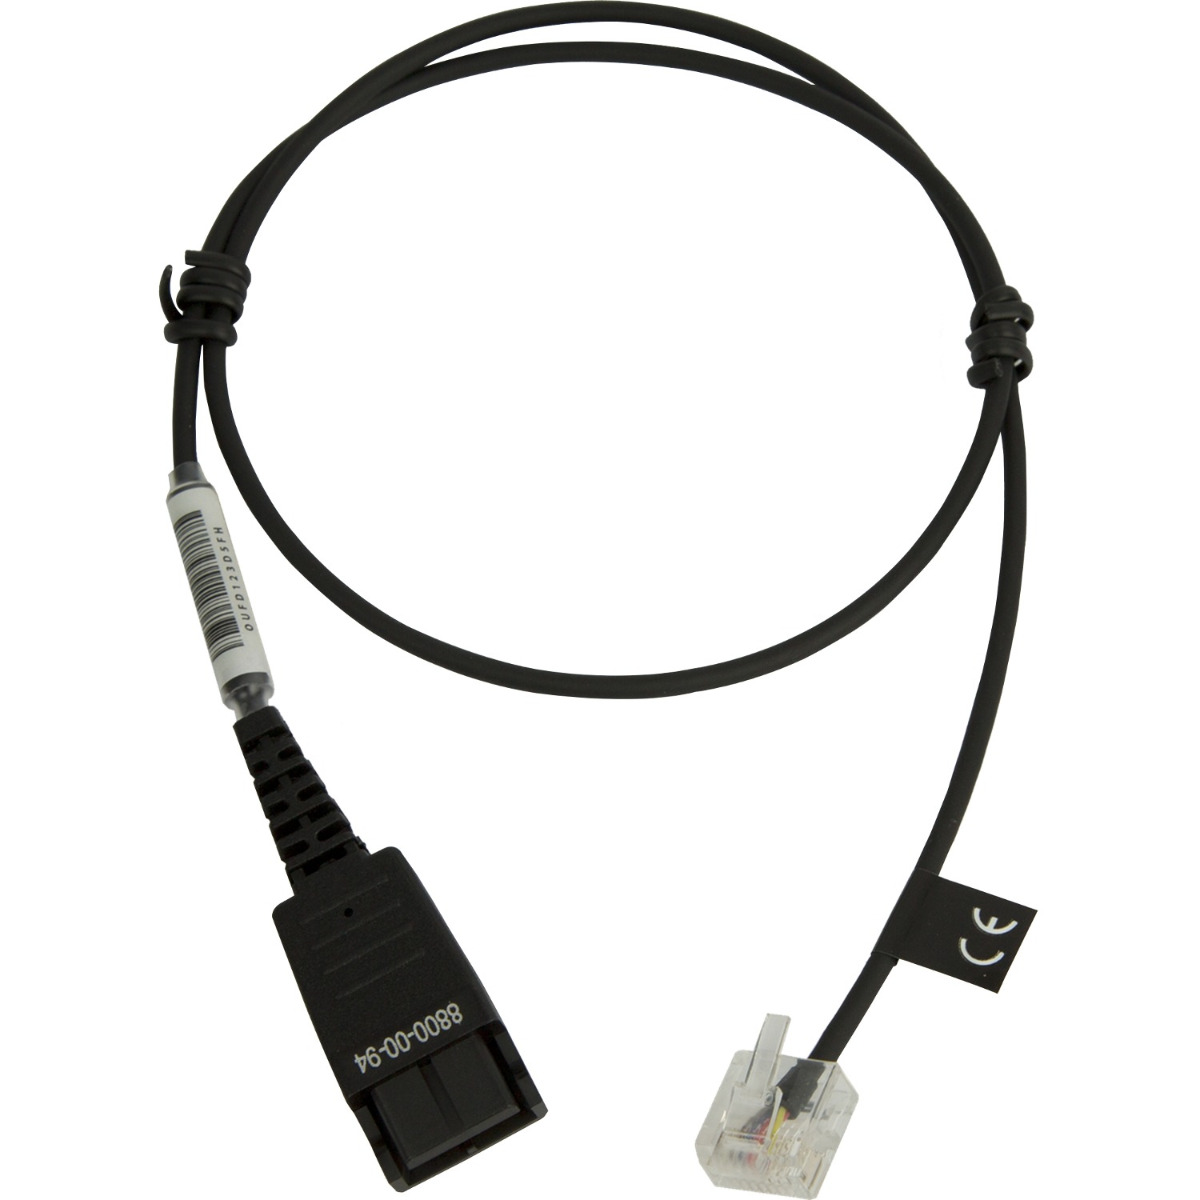 Adapter Qd To Rj45 Special Gn Audio Business 8800 00 94 706487011453